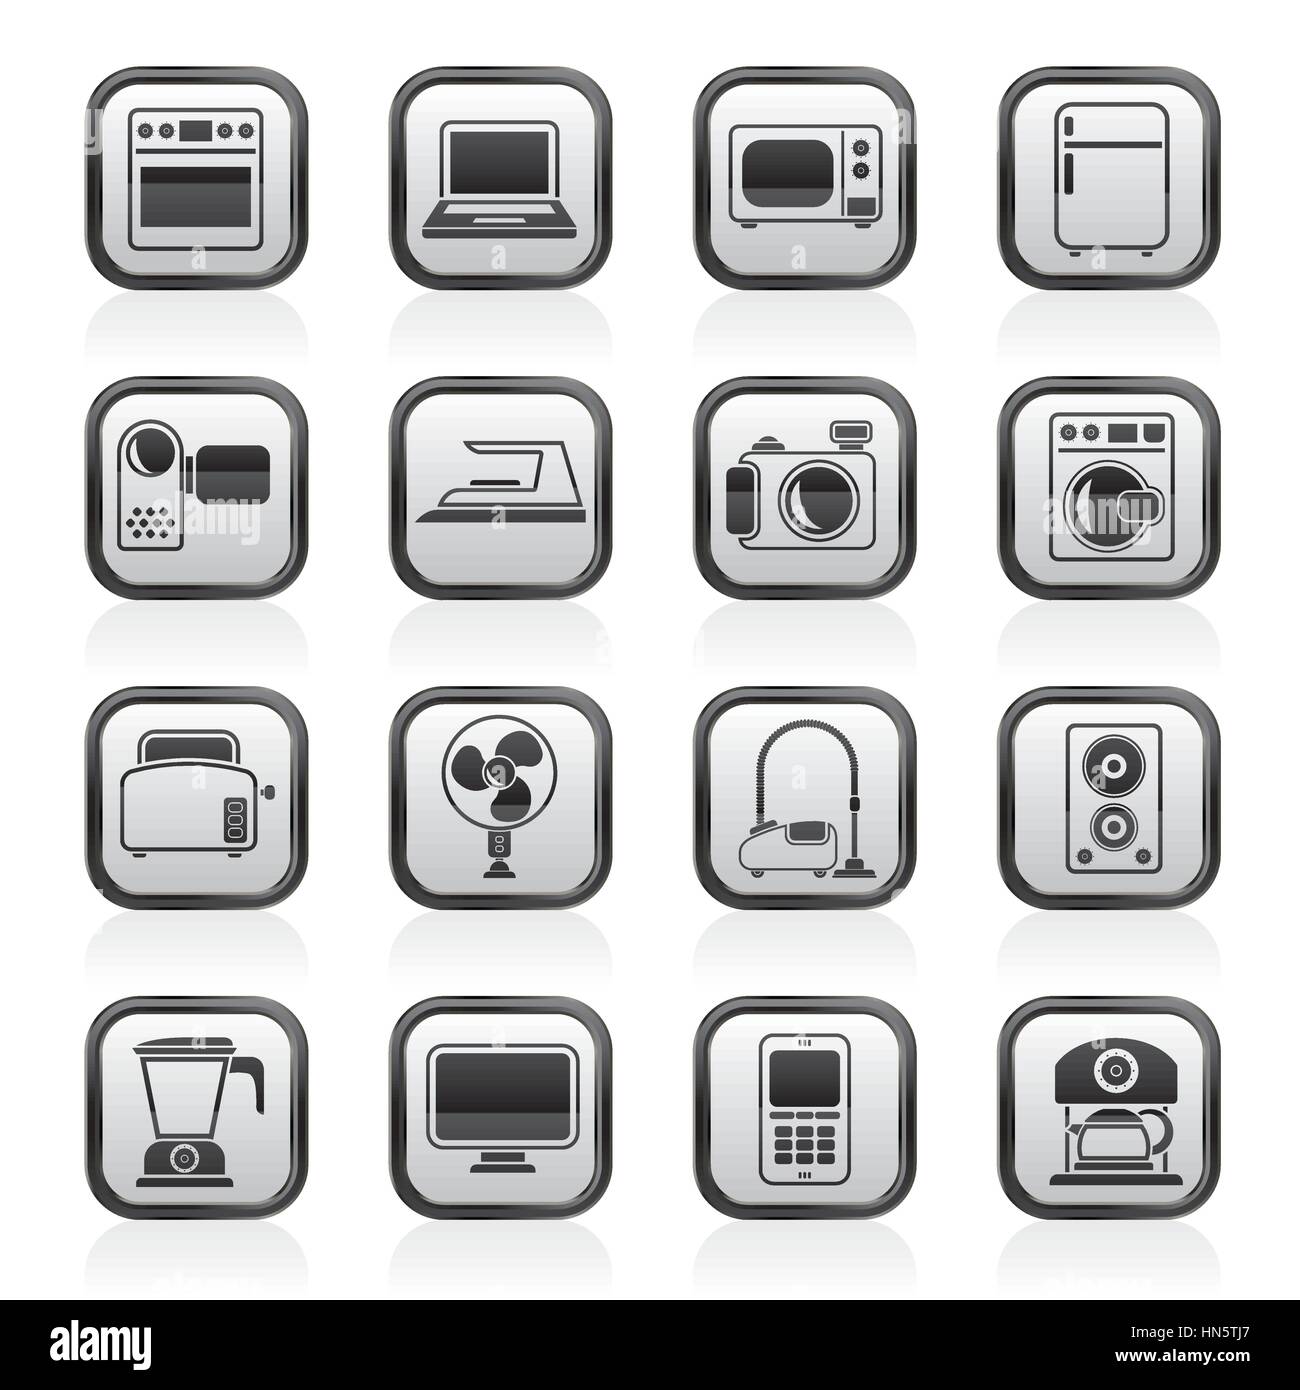 household appliances and electronics icons Stock Vector